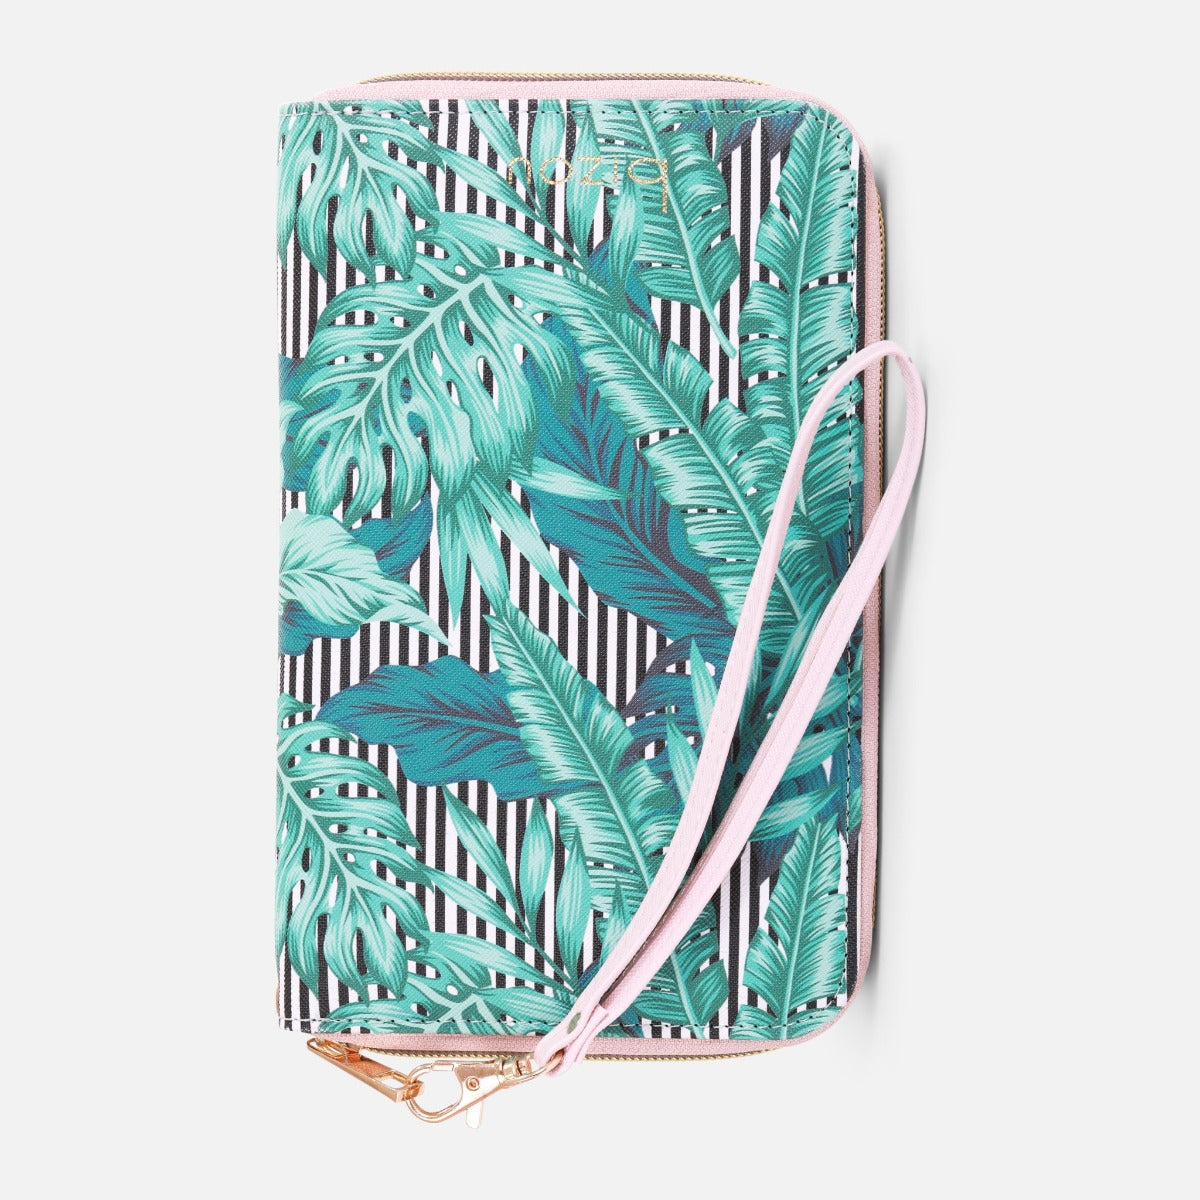 Family passport case with tropical print